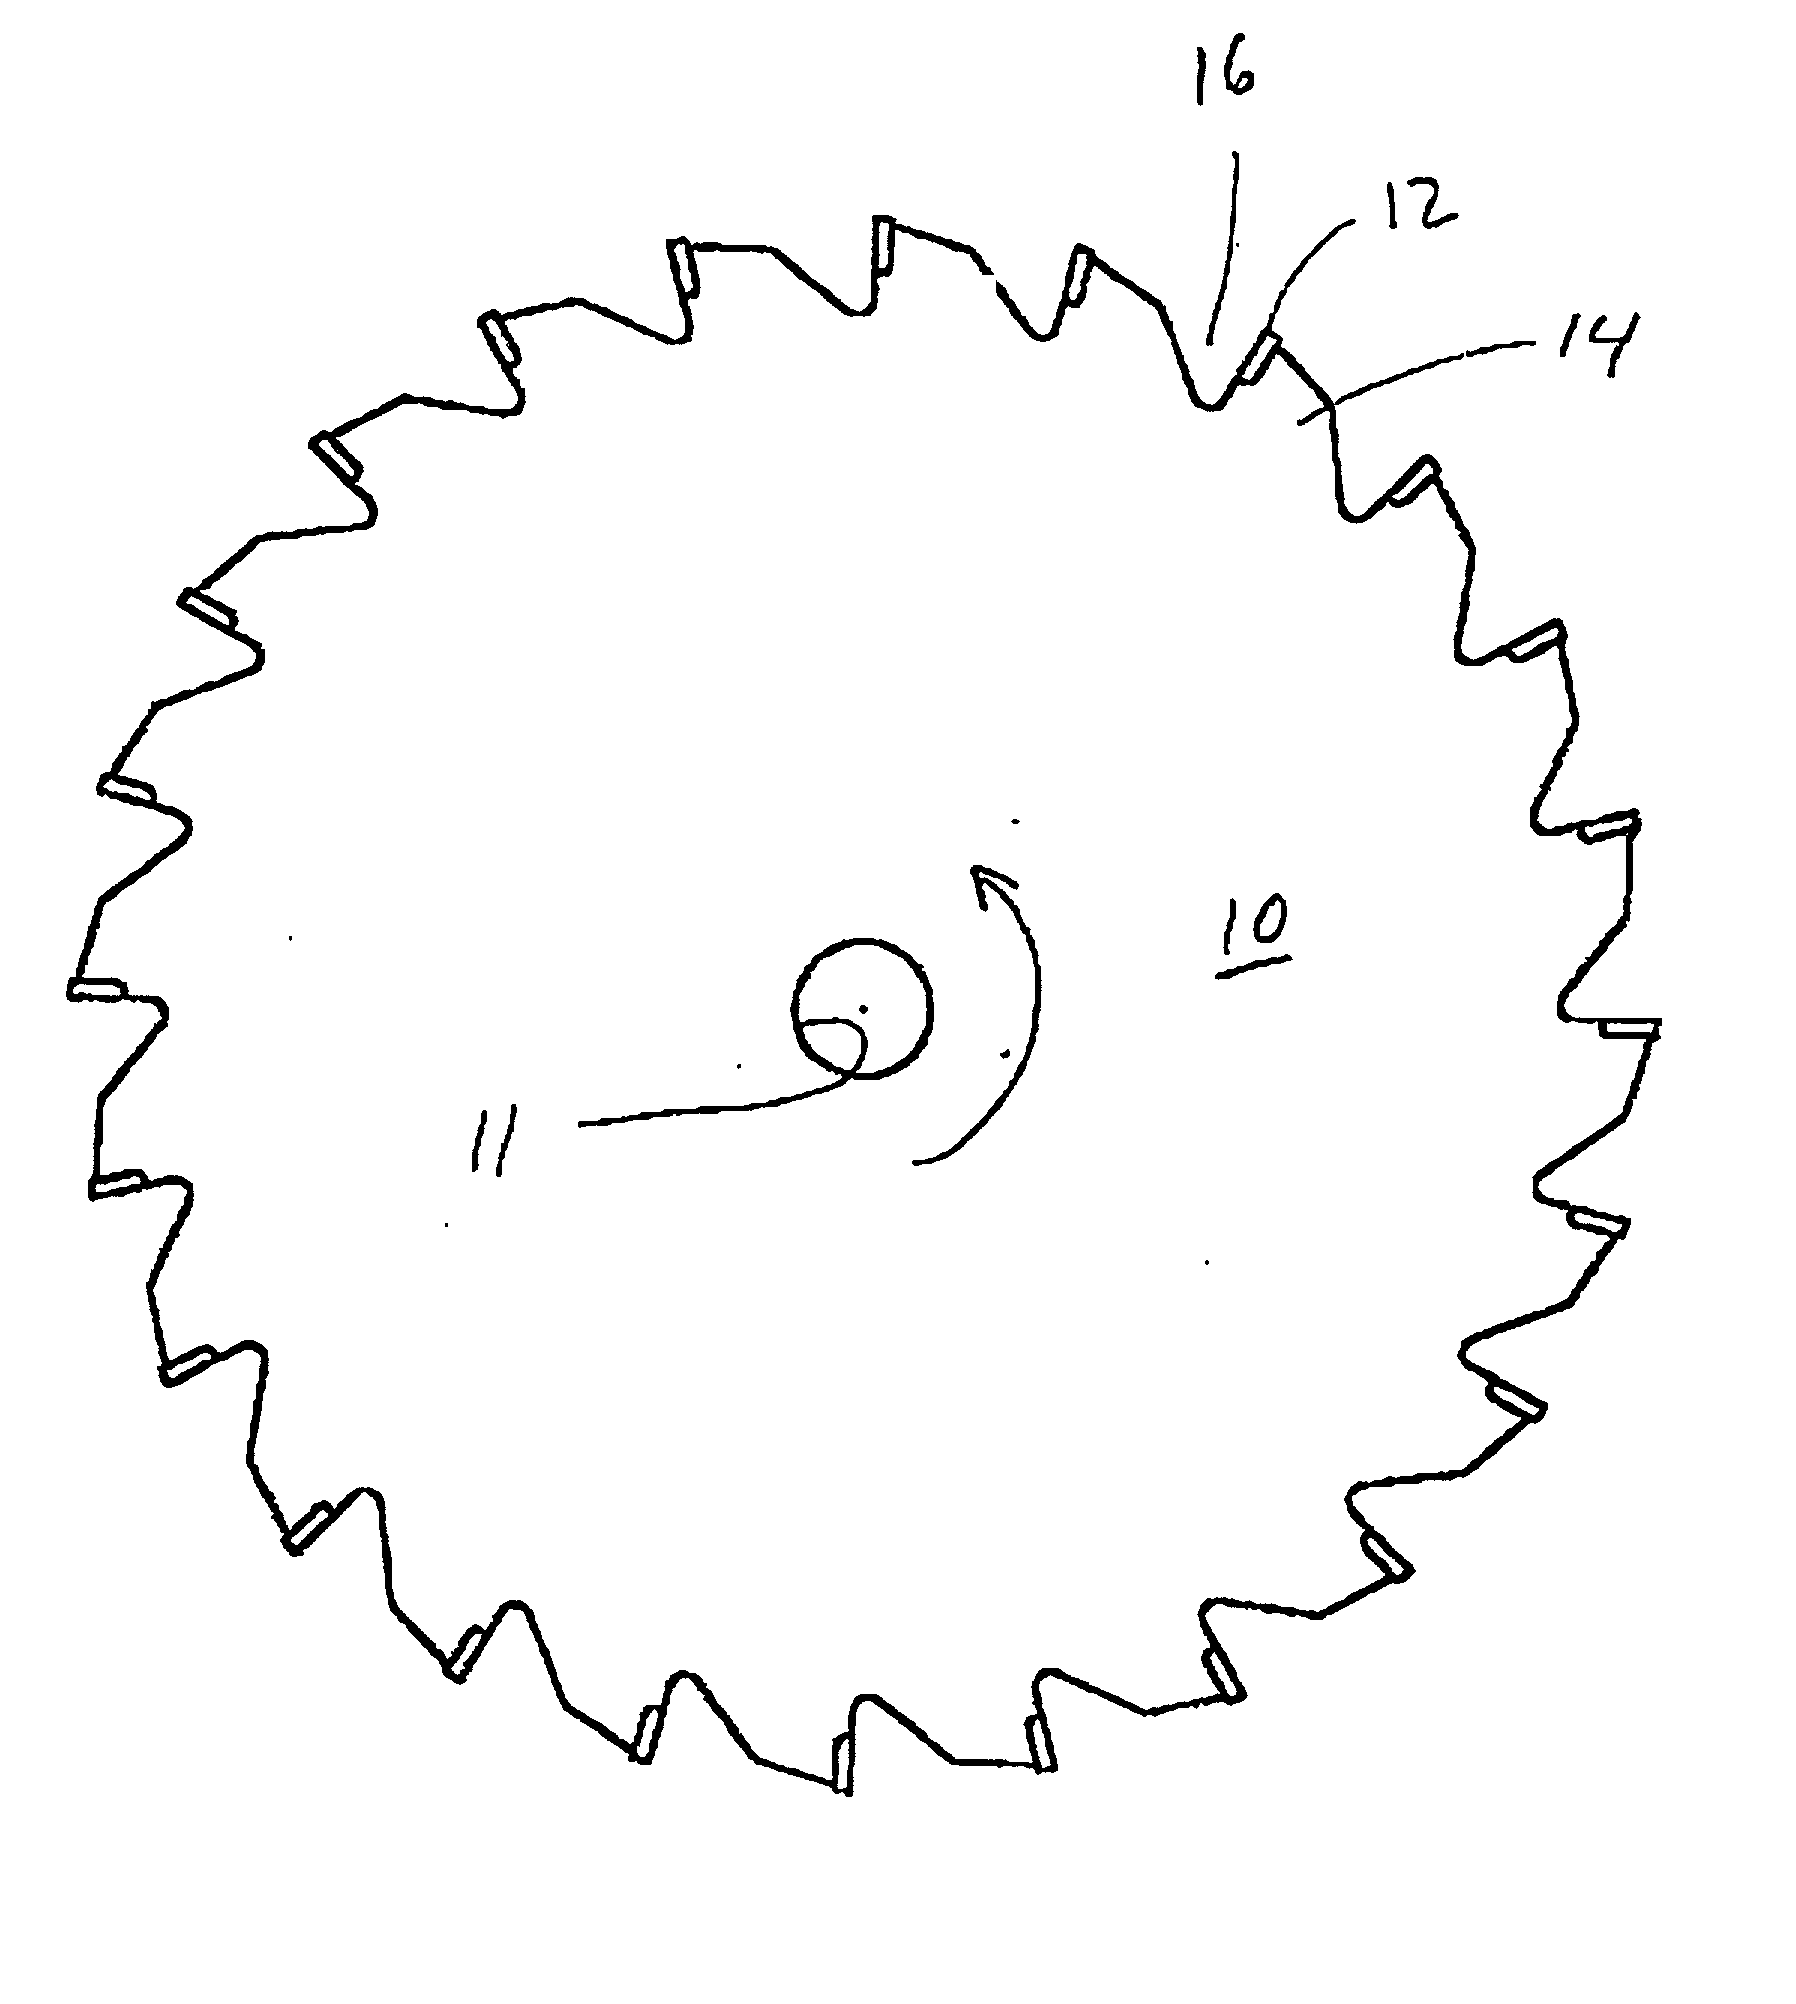 Circular Saw Blade Drawing Images & Pictures - Becuo